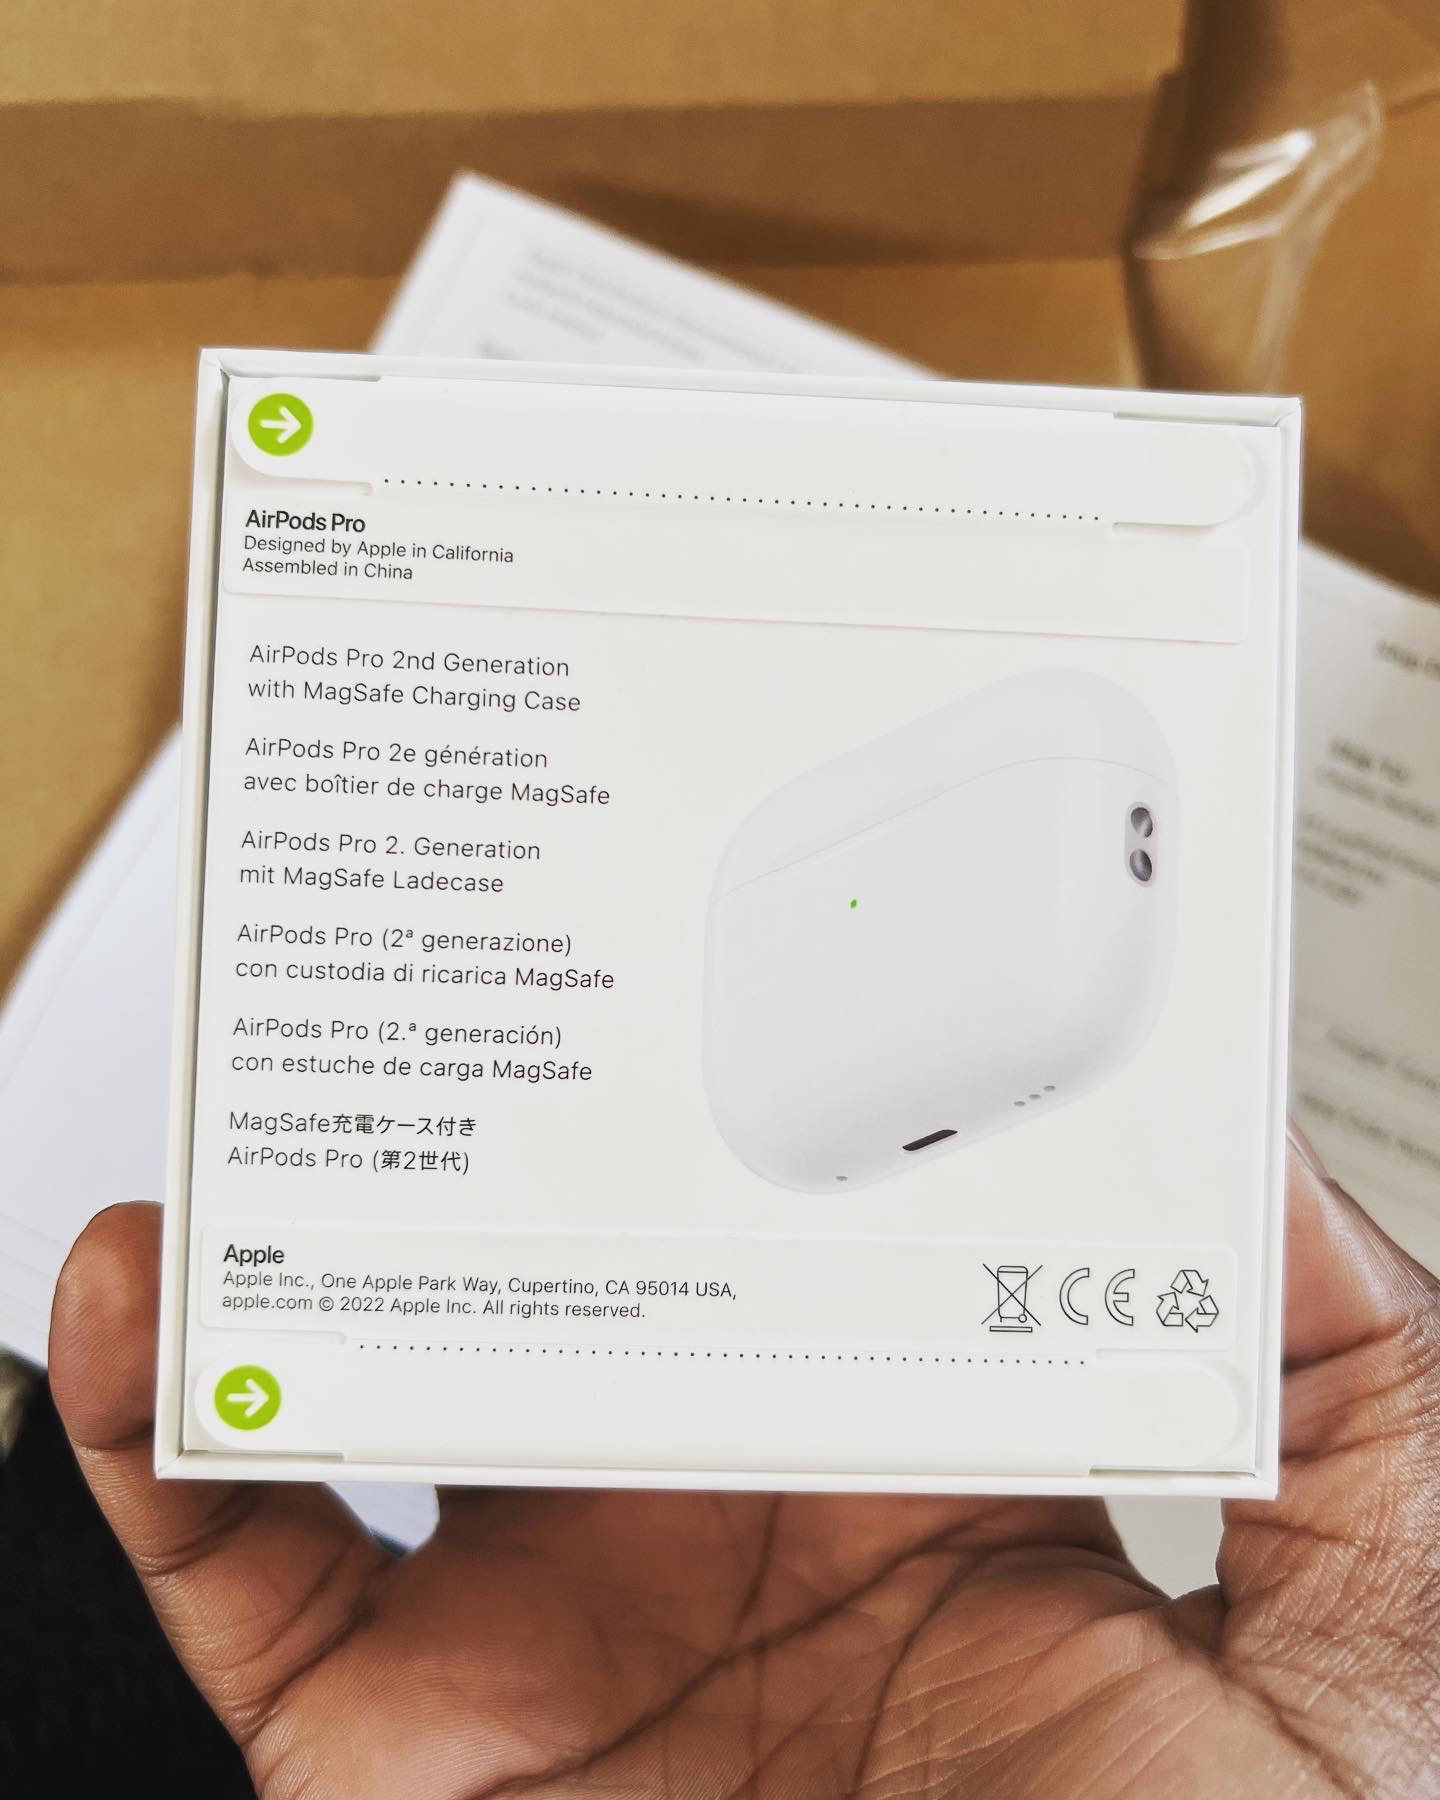 Are my AirPods Pro fake? - Apple Community